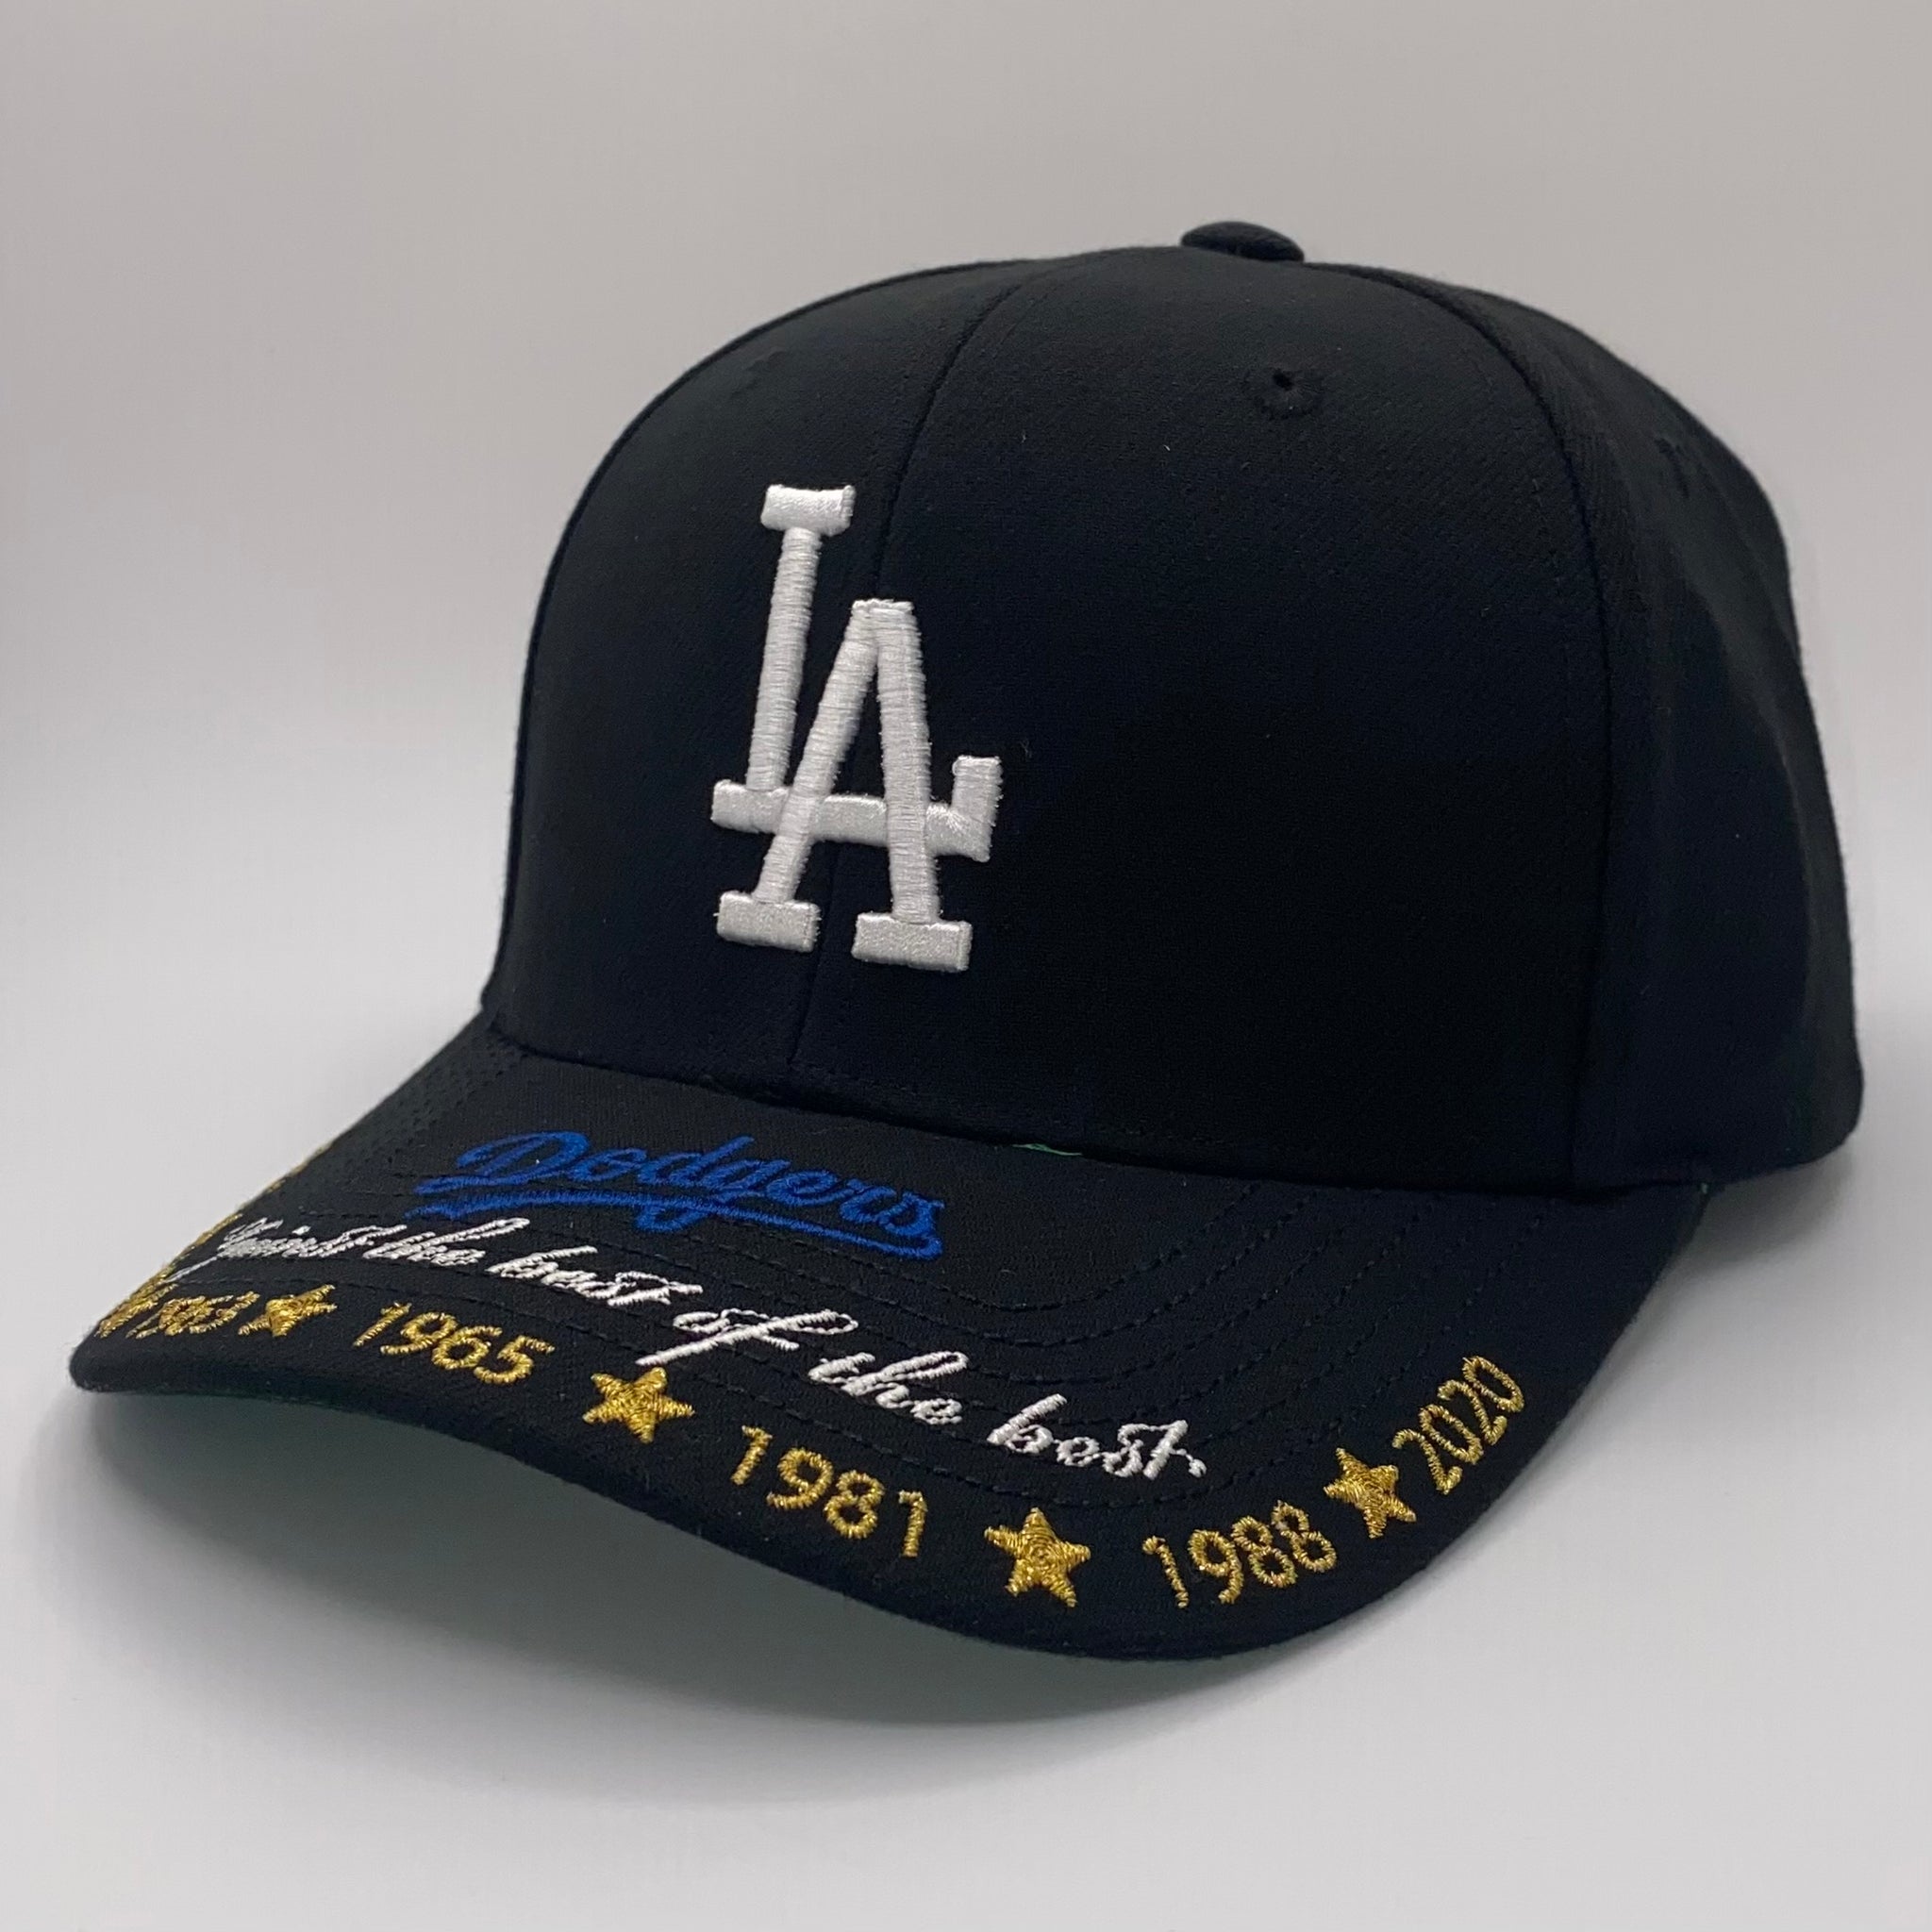 Los Angeles Dodgers "Against the Best of the Best" Snapback Hat